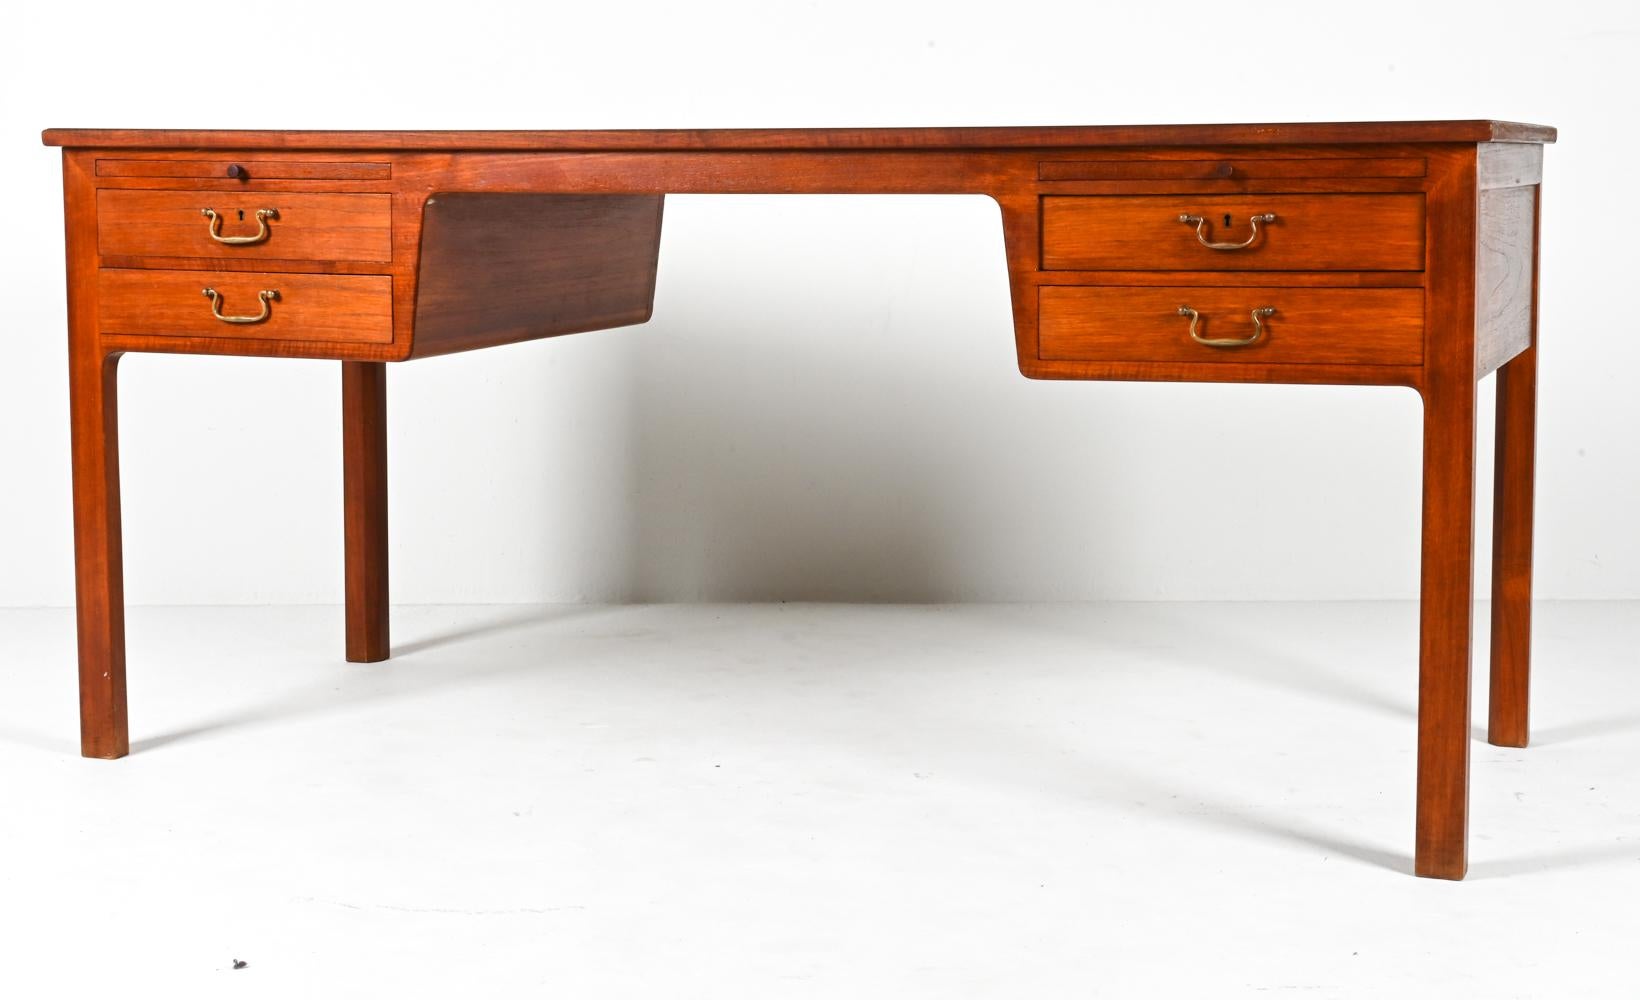 Rich mahogany takes on a glowing, satin-like luminescence in this breathtaking and rare writing desk by Ole Wanscher. The simple form is perfectly proportioned, with elegant squared legs supporting two symmetrical pairs of dovetailed drawers, each